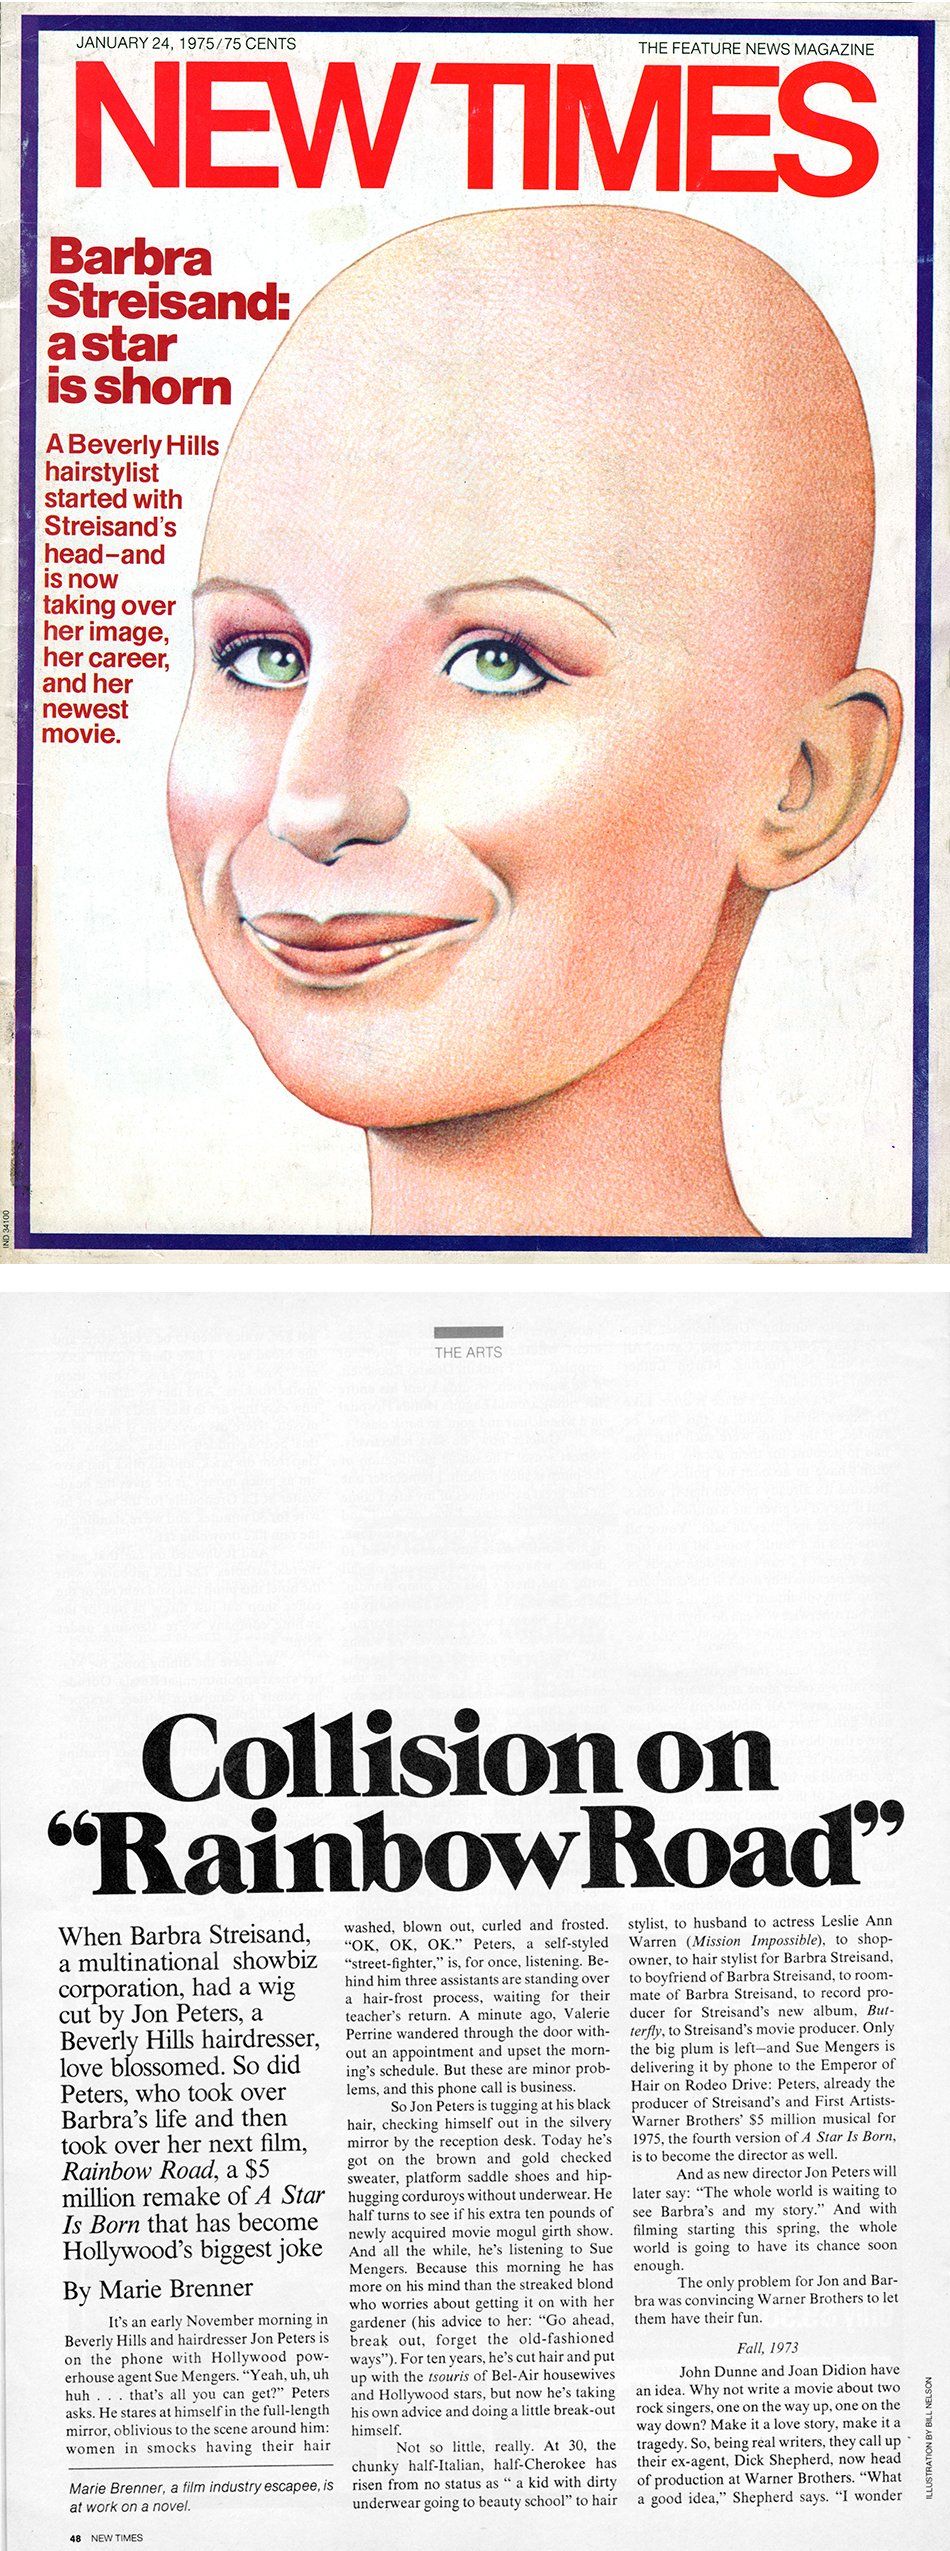 New Times Magazine cover with illustration of bald Streisand.